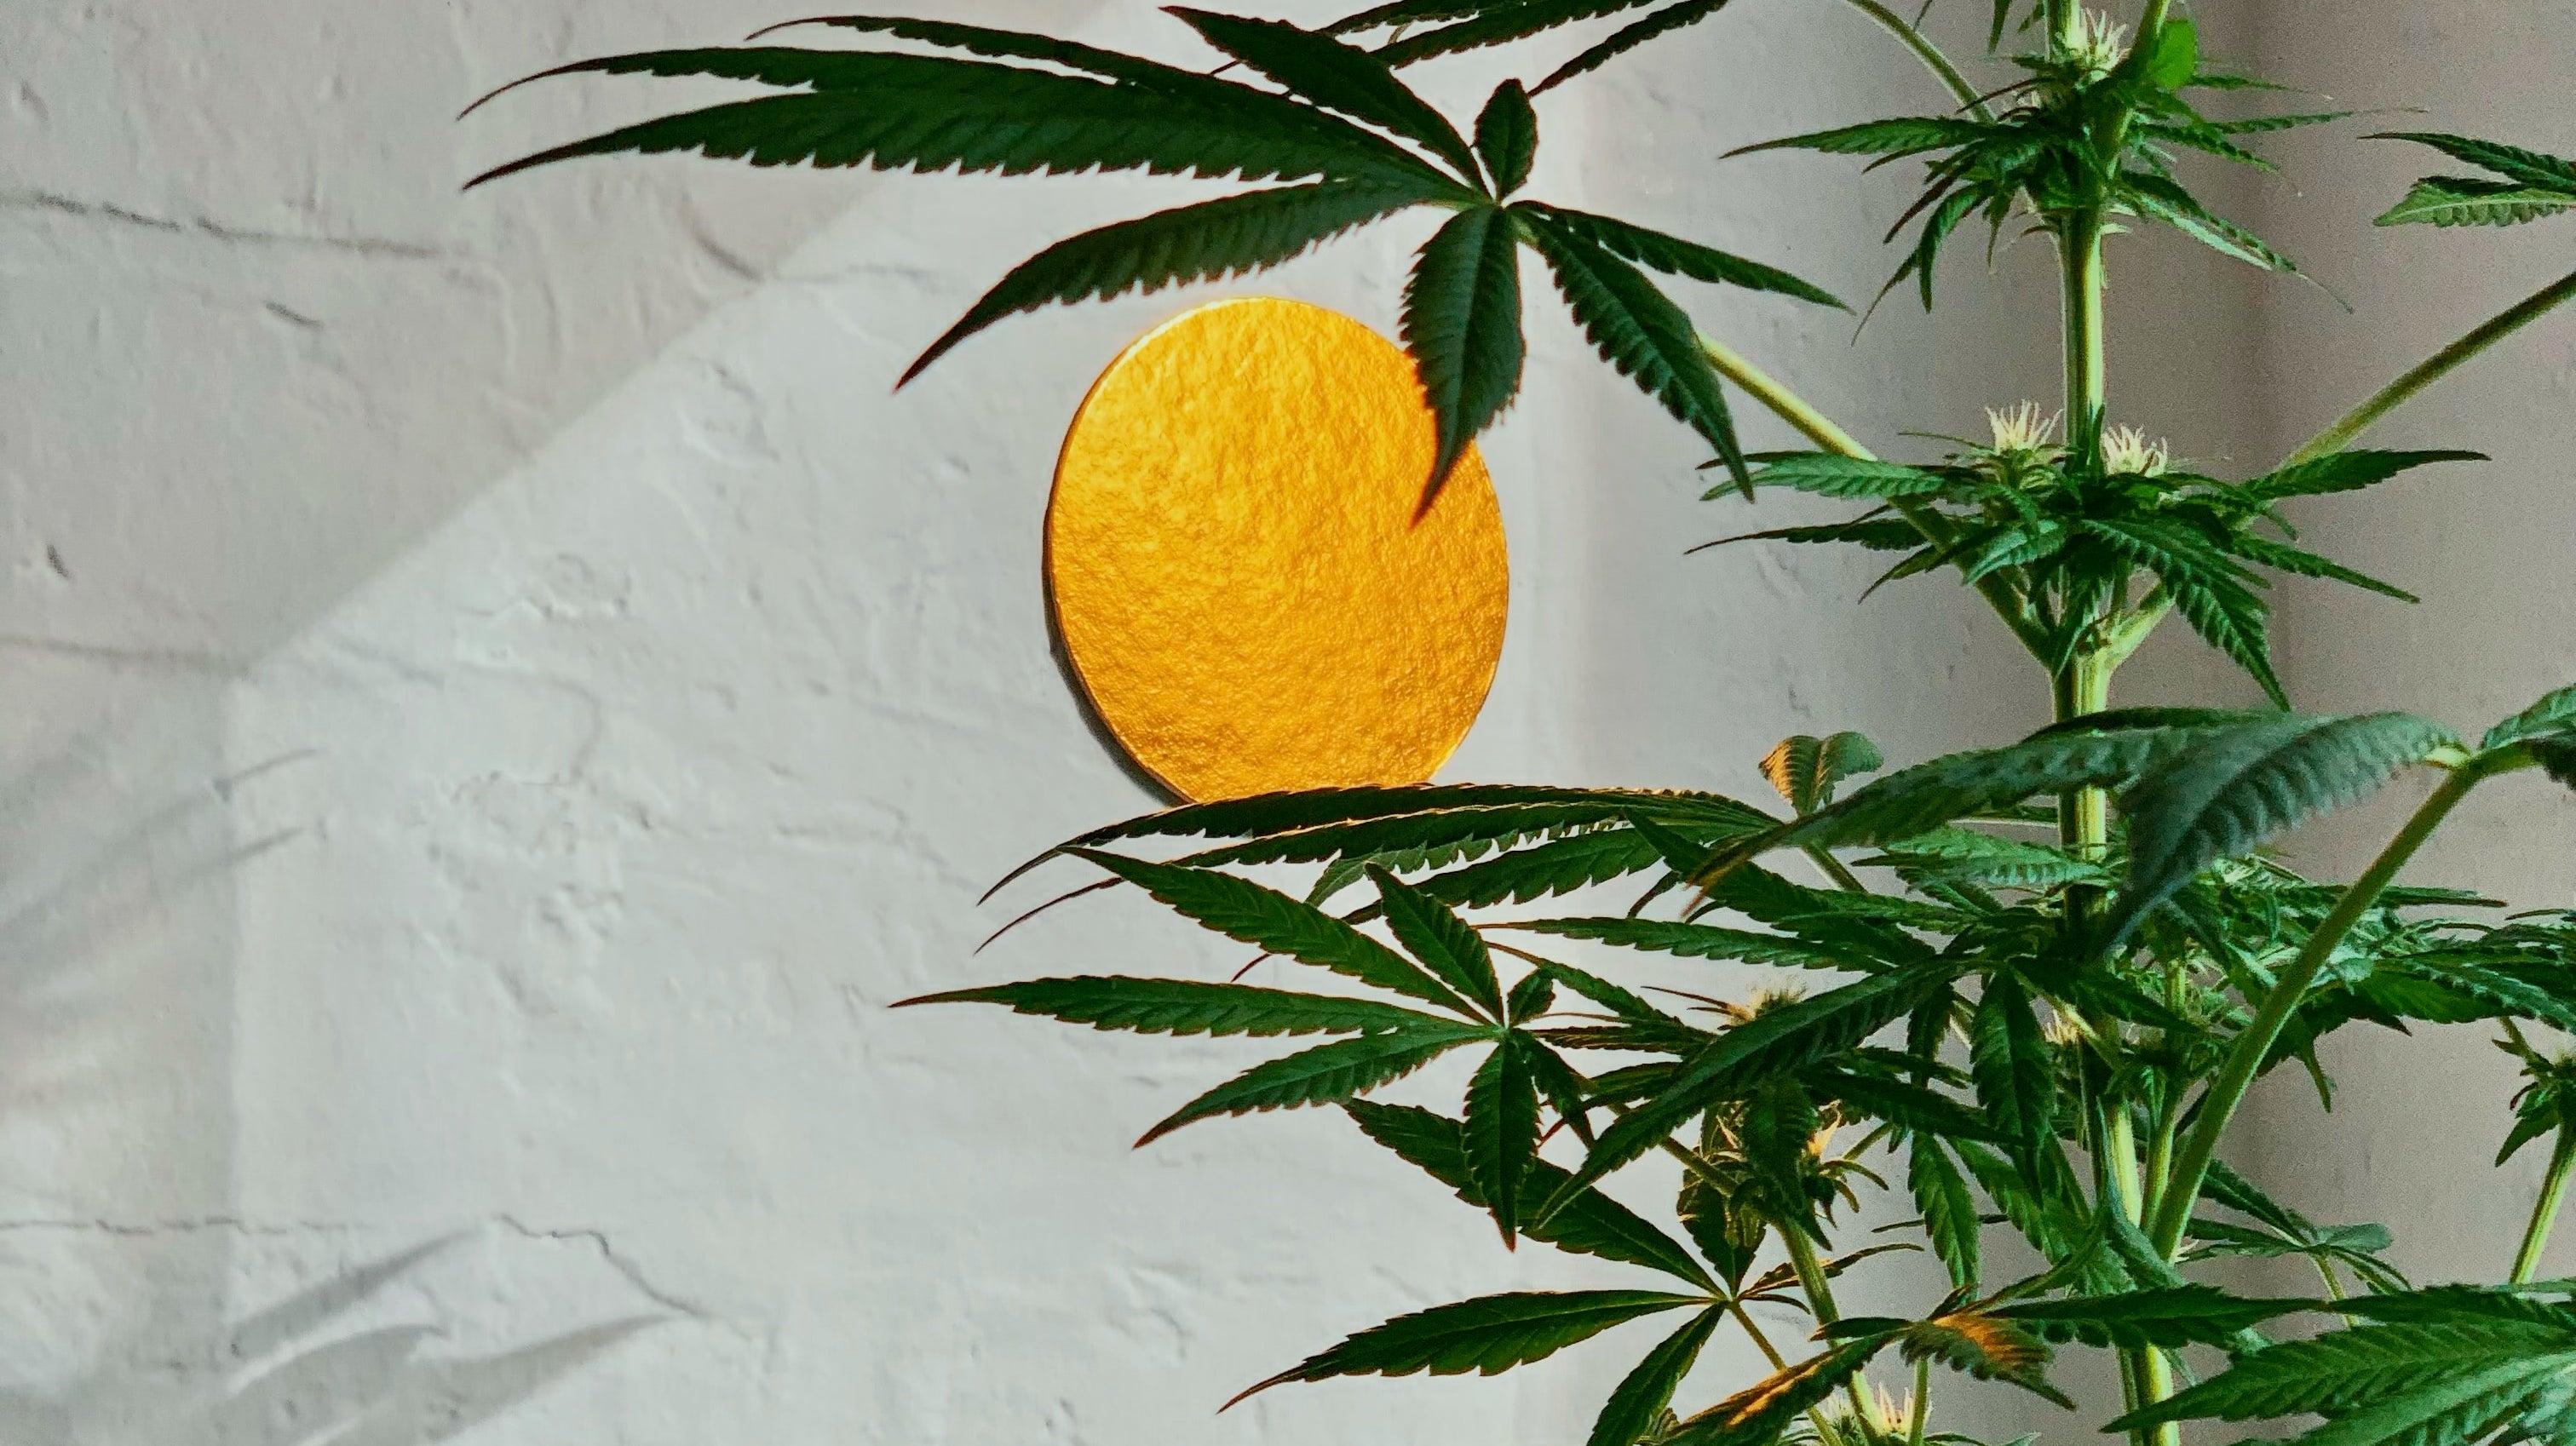 A tall hemp plant growing in front of a wall with a picture of a sun on it.